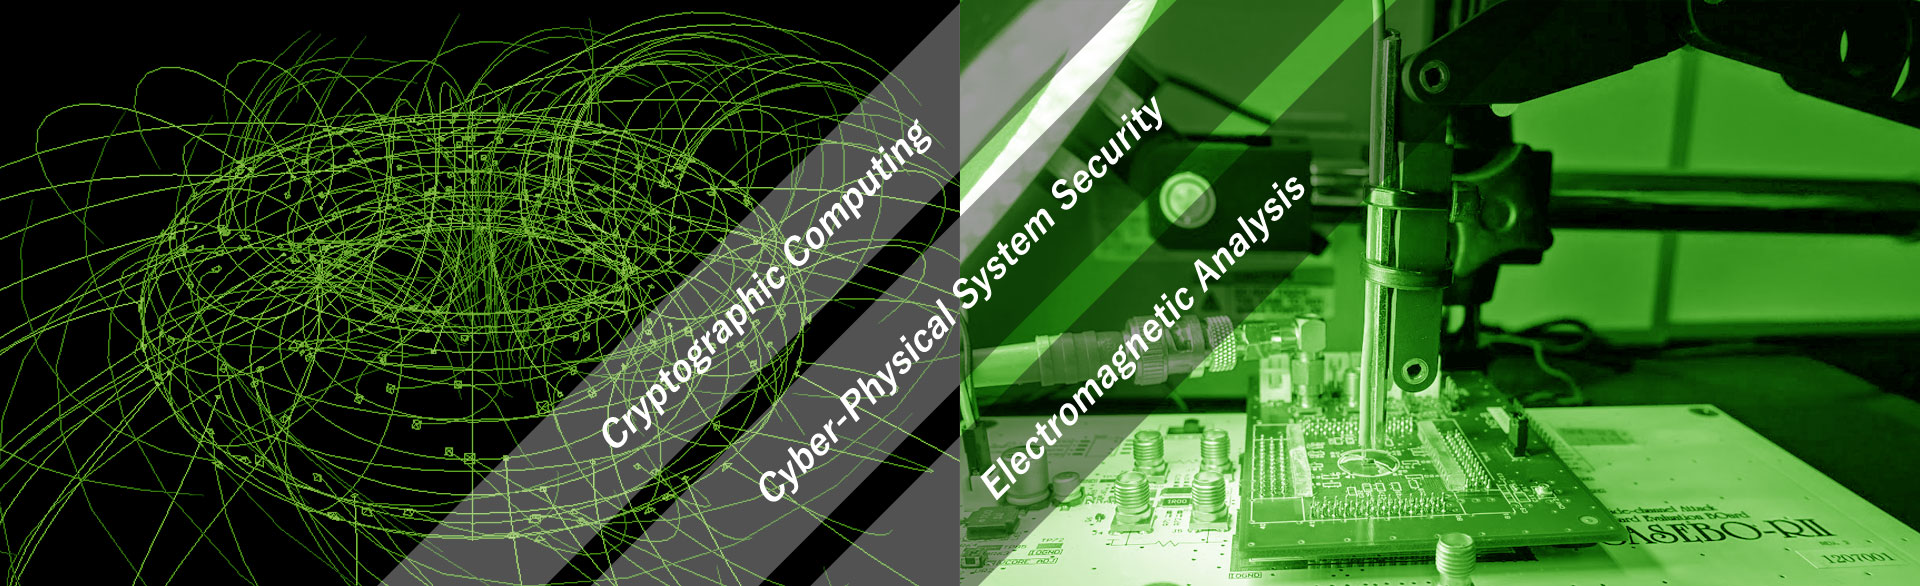 Cryptographic Computing, Cyber-Physical System Security, Electromagnetic Analysis